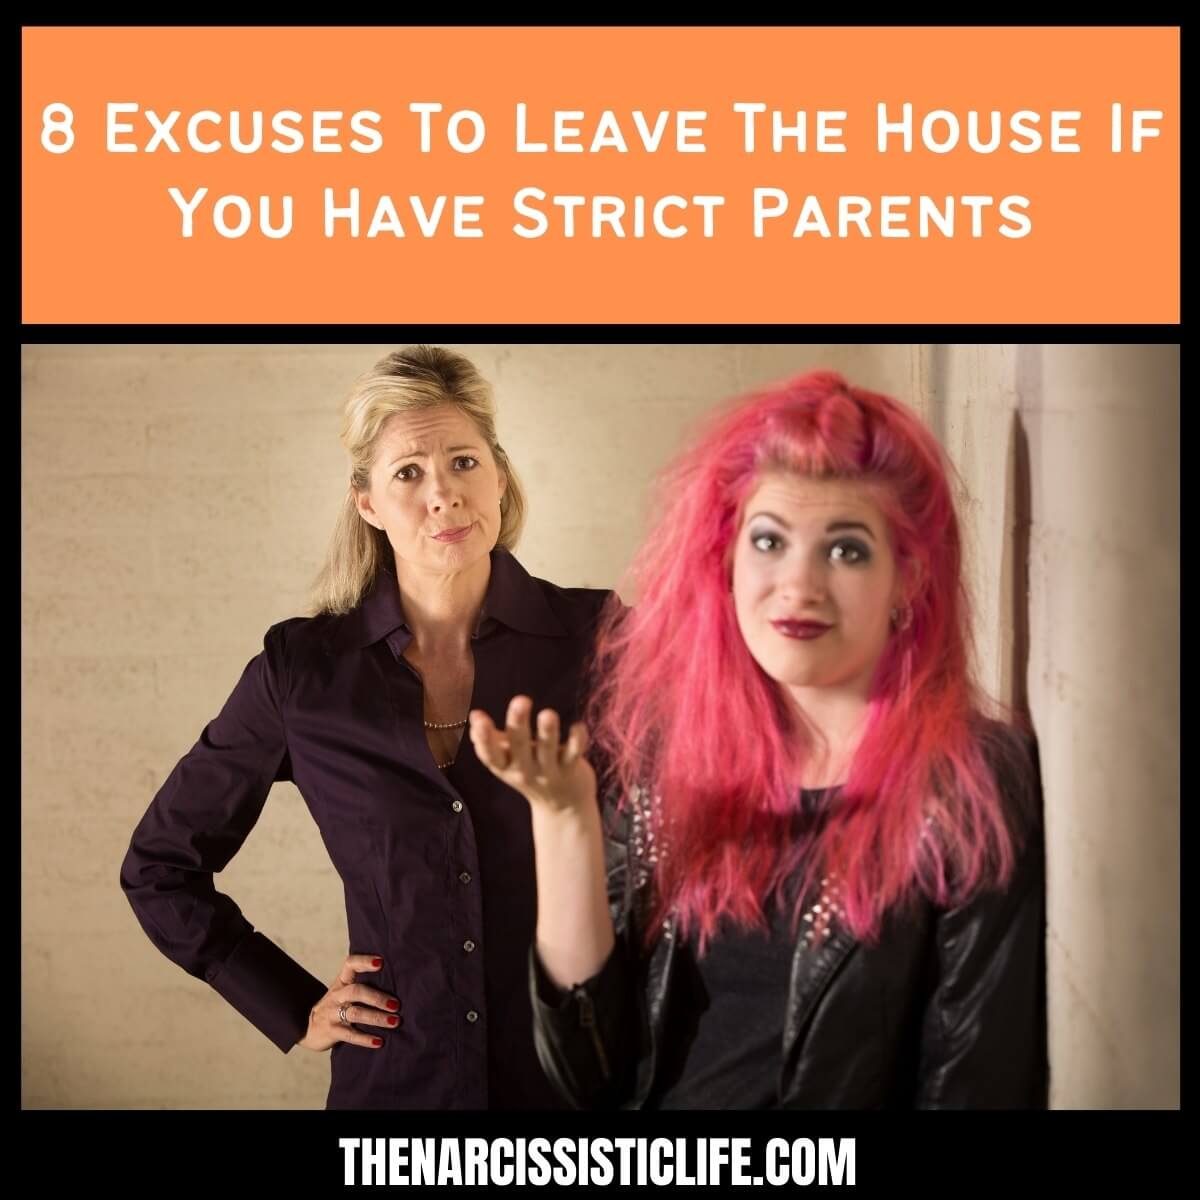 8 Excuses To Leave The House If You Have Strict Parents